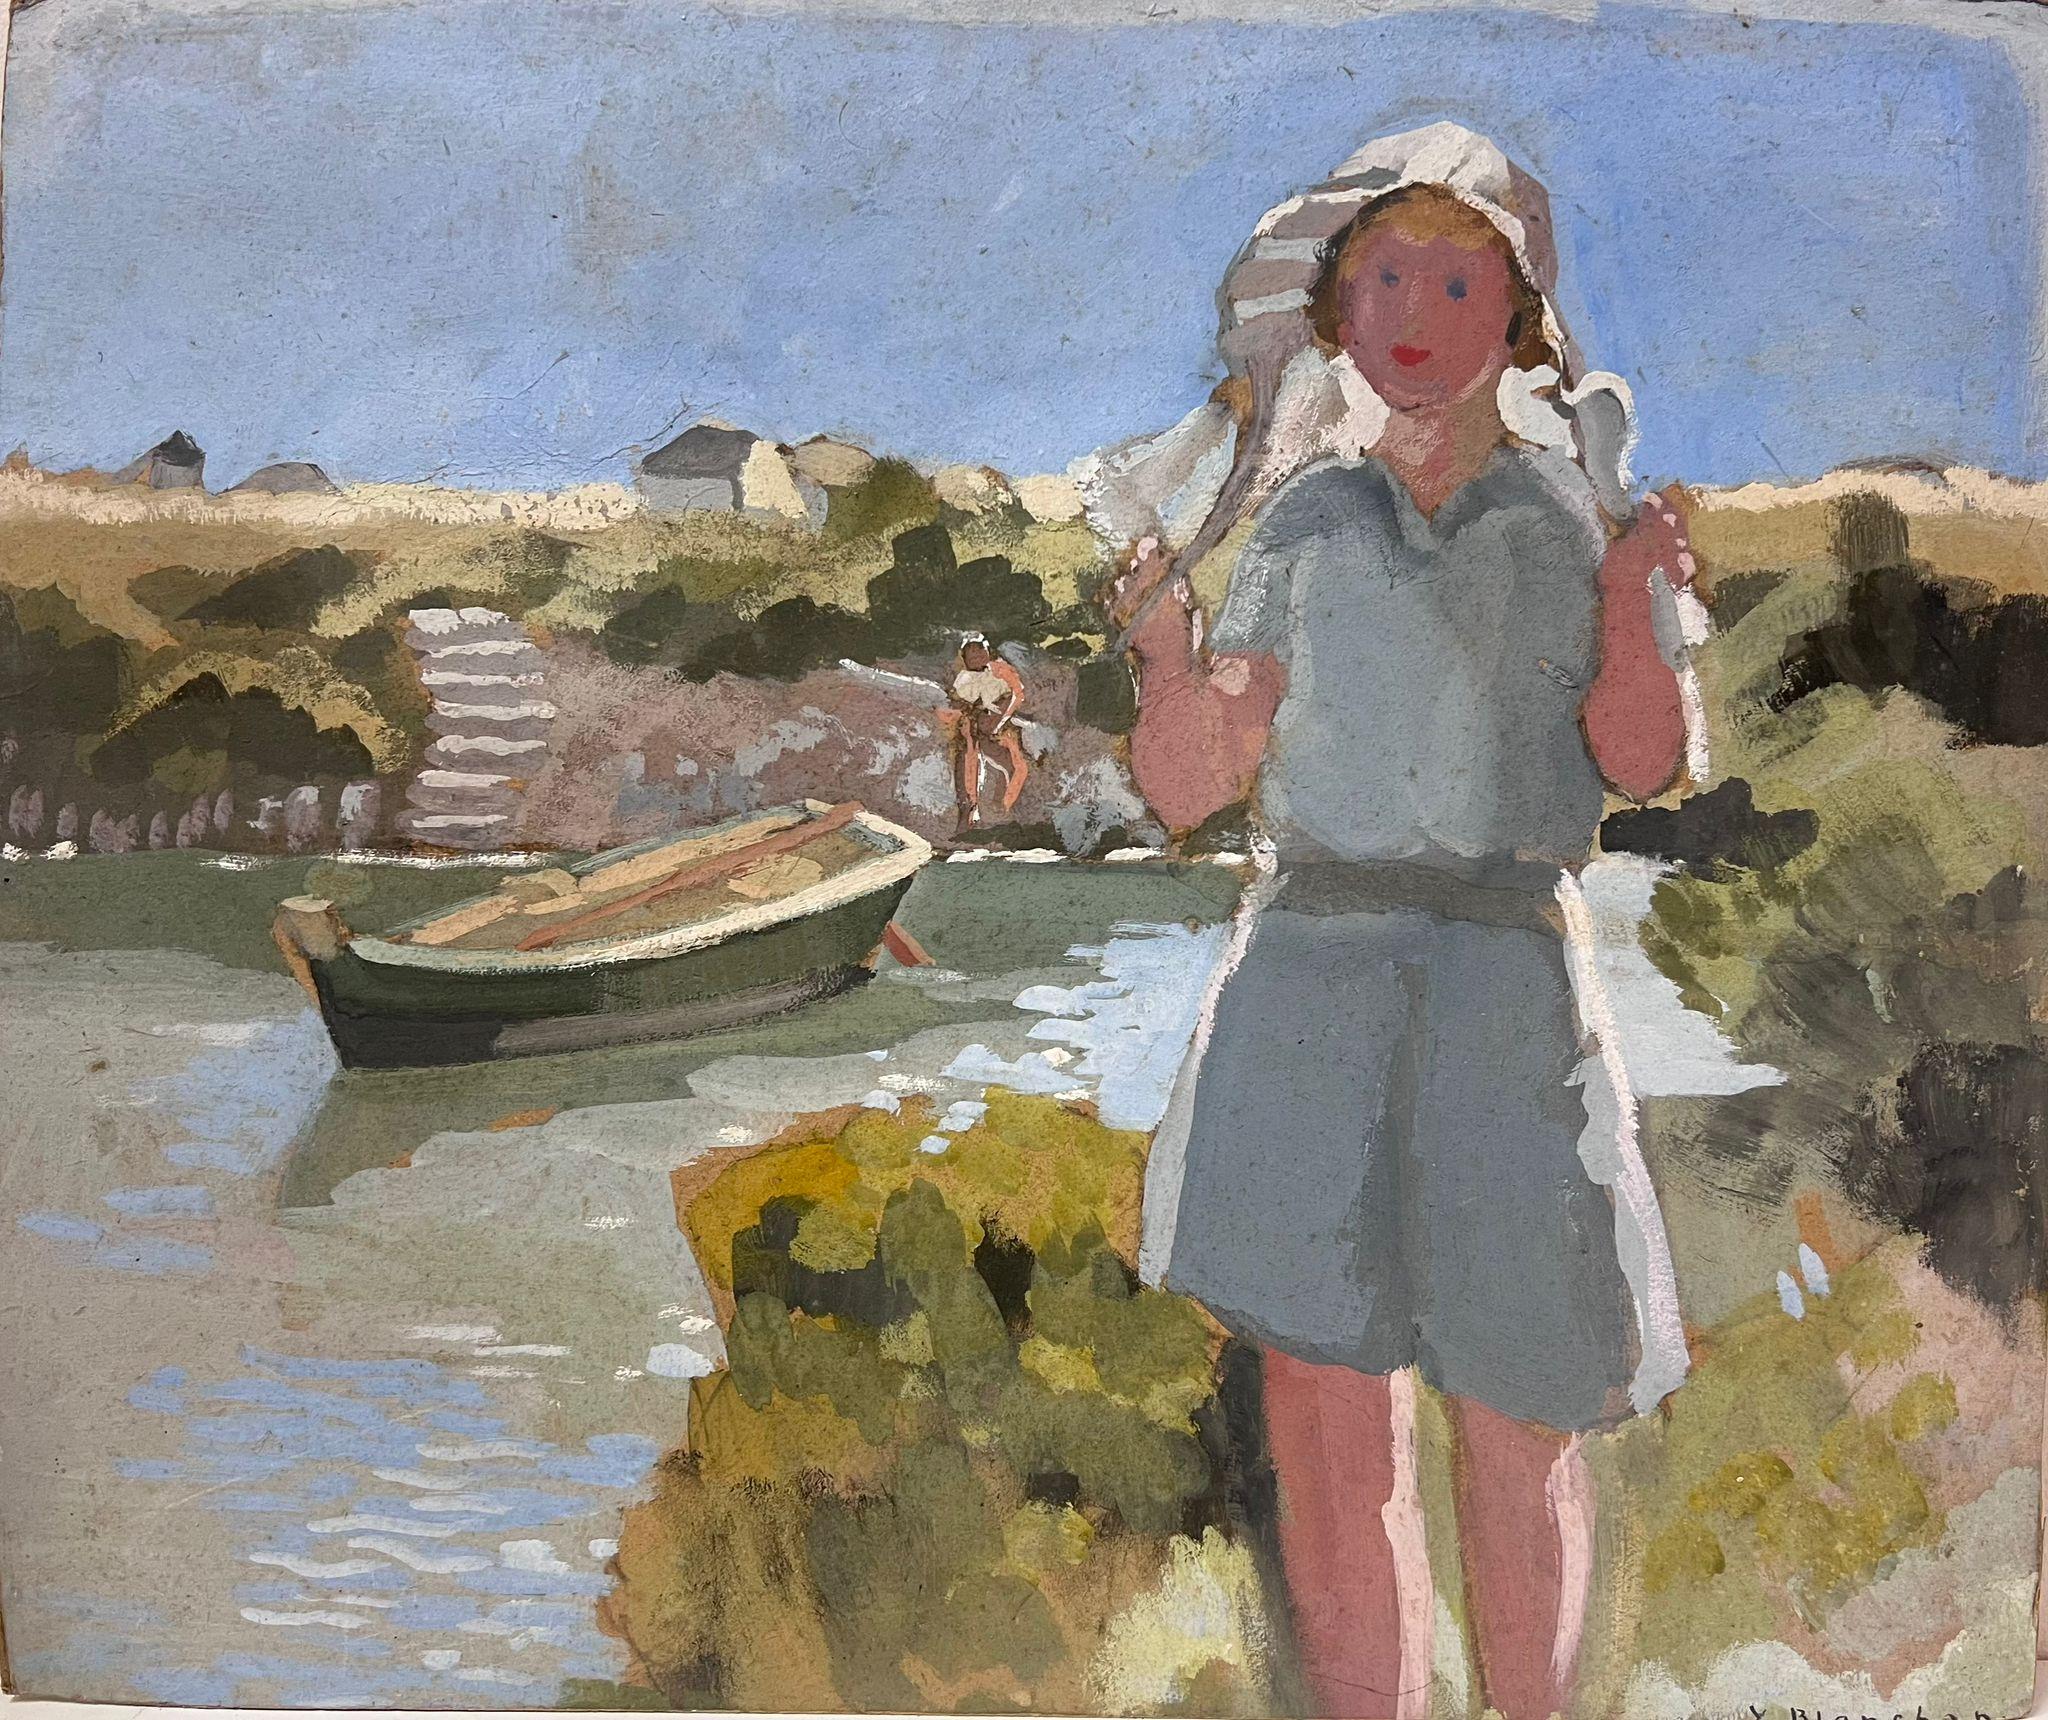 Y. Blanchon Figurative Painting - 1930's French Impressionist Painting Young Girl by Boat Coastal Estuary Harbour